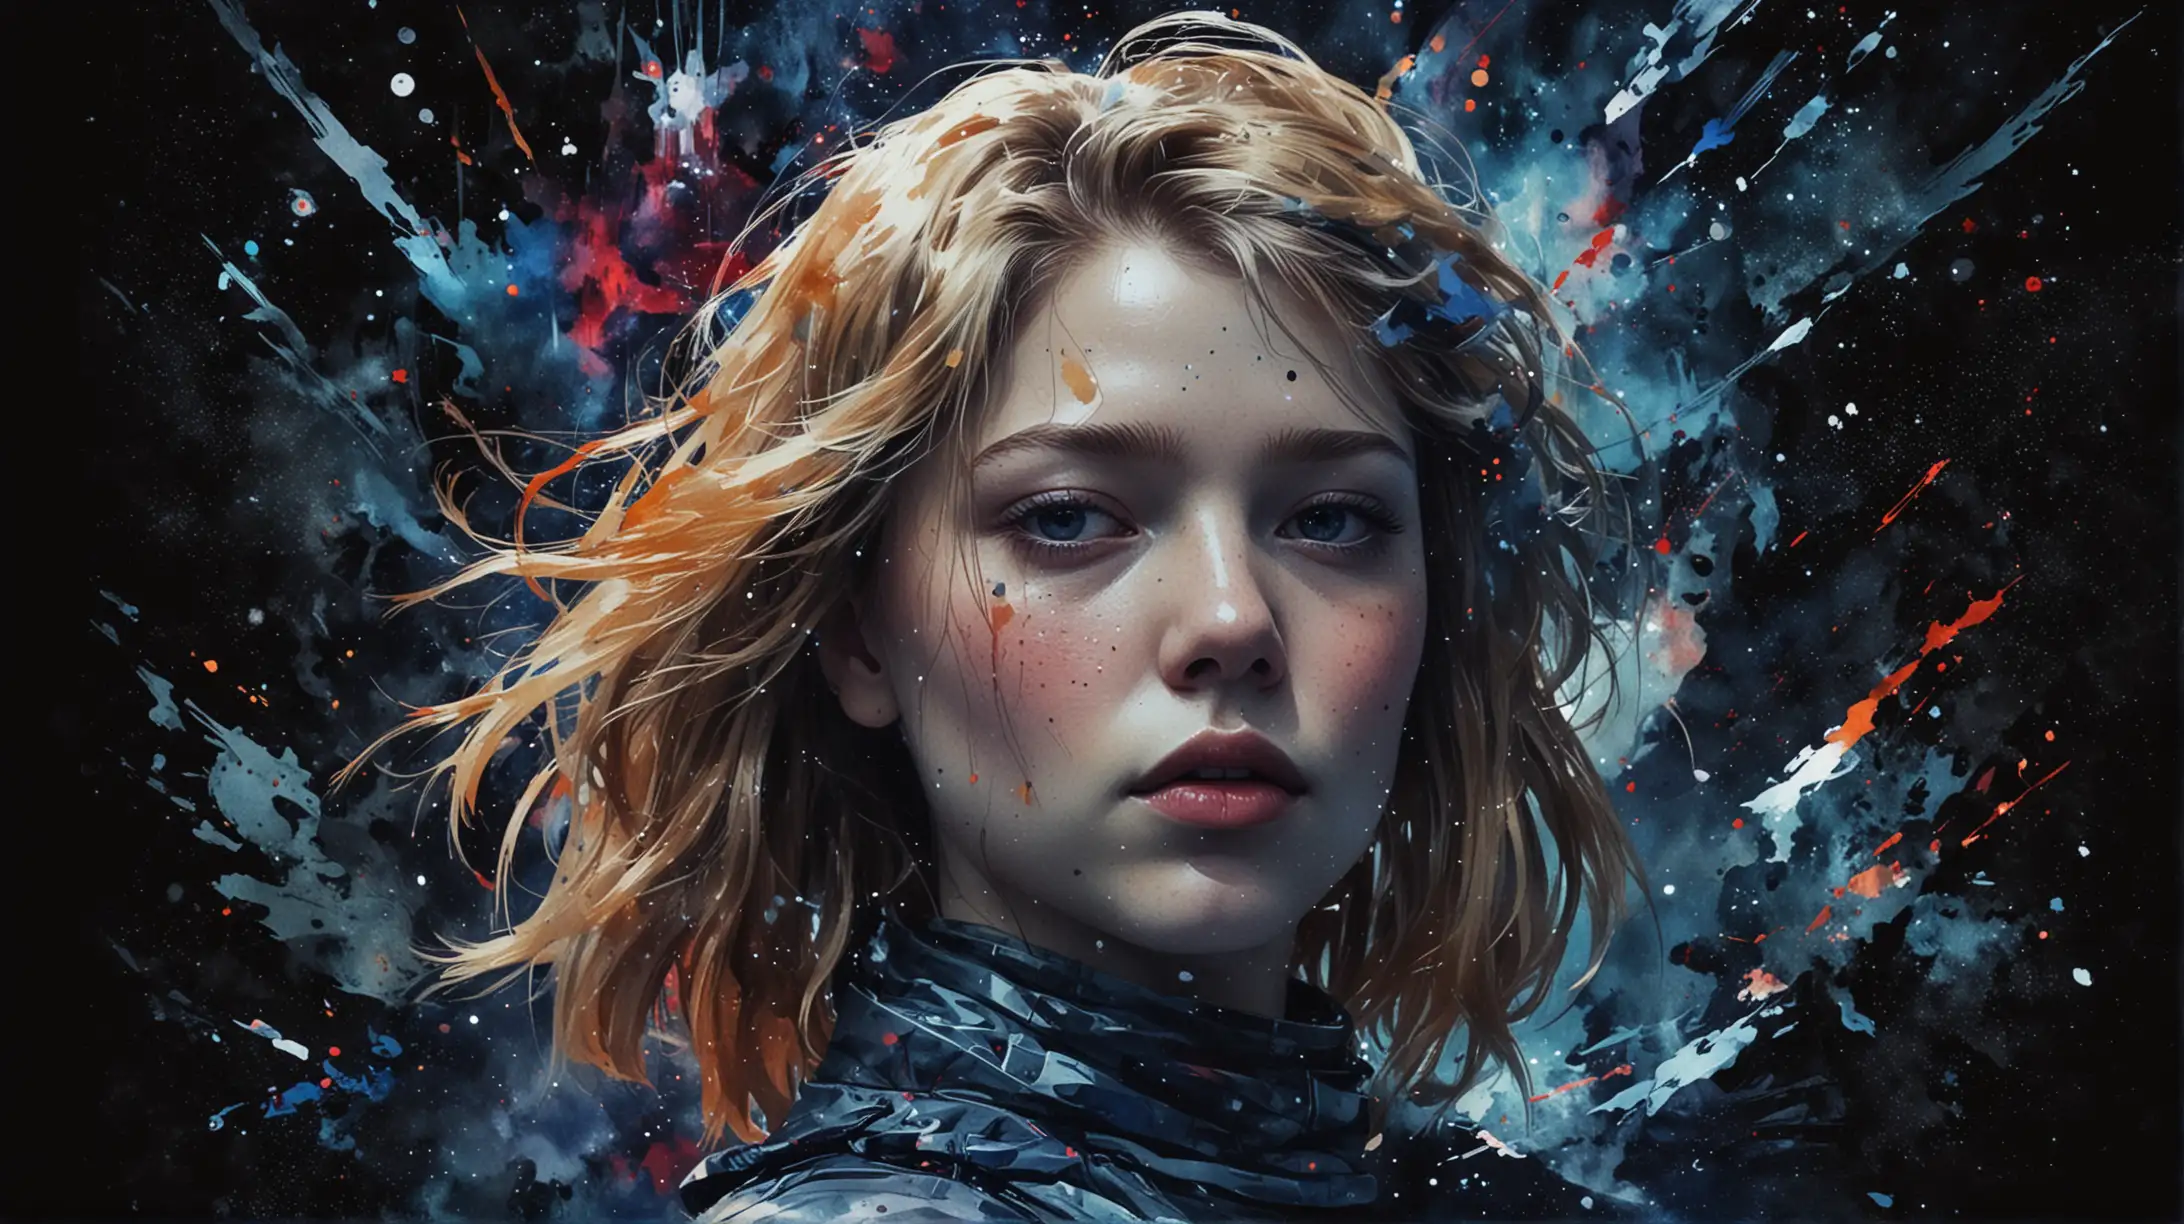 watercolor, Léa Seydoux, space, Glitch, abstract, astral, dark